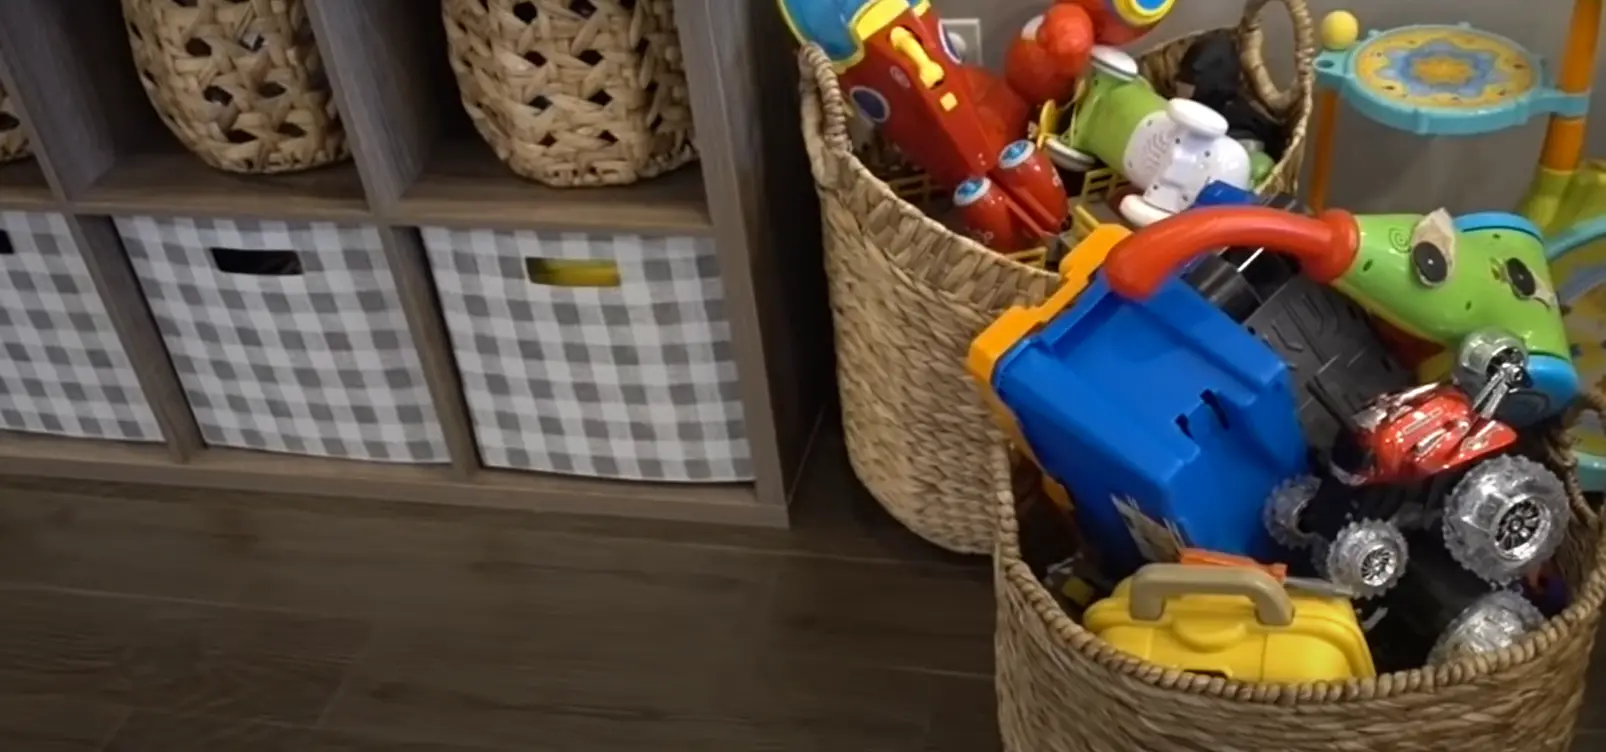 Why do You Need to Organize Toys in a Living Room